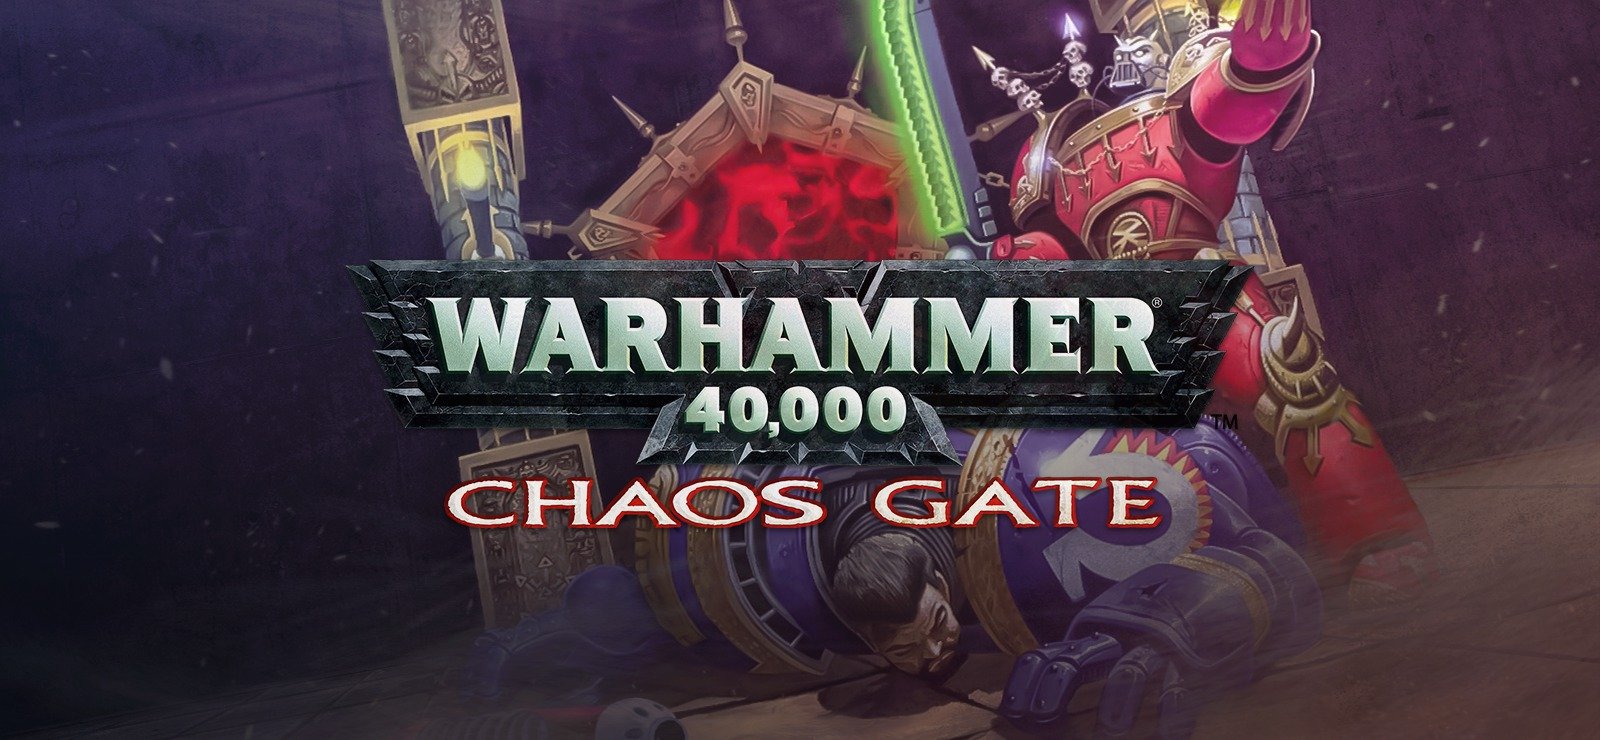 download the new version for windows Warhammer 40,000: Chaos Gate - Daemonhunters